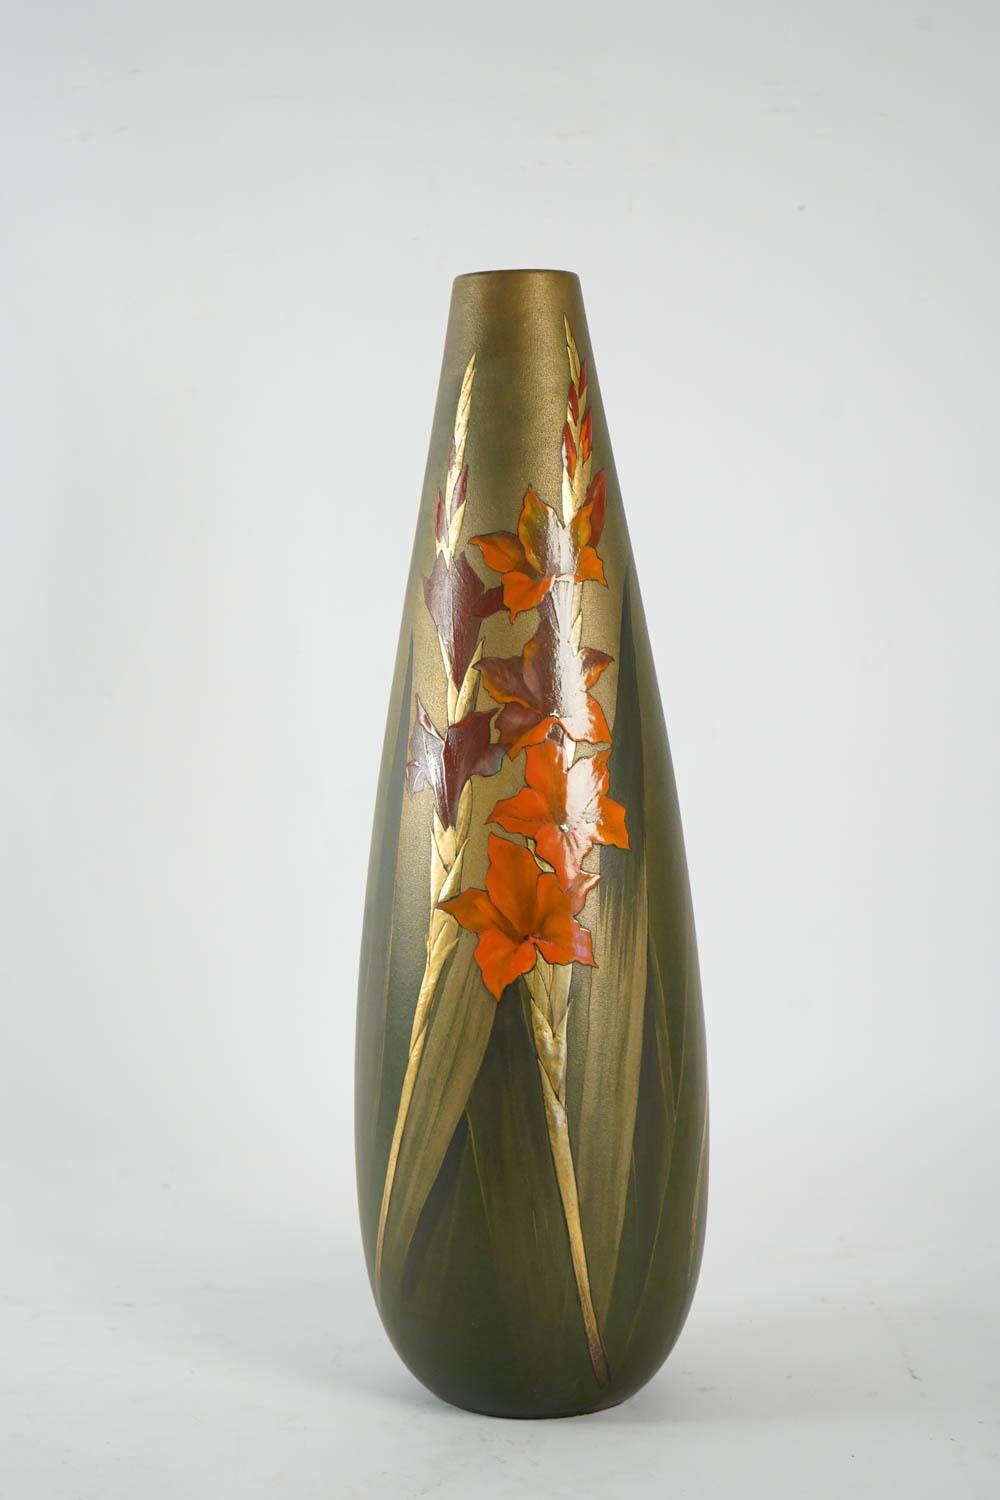 Pair of ceramics vases, Art Nouveau period, green enameled base, with decors of Iris branches d'iris orange, violet and gold, signed under the base Clément Massier Golfe Juan, AM.
Clément Massier is considered as the founder, at the beginning of